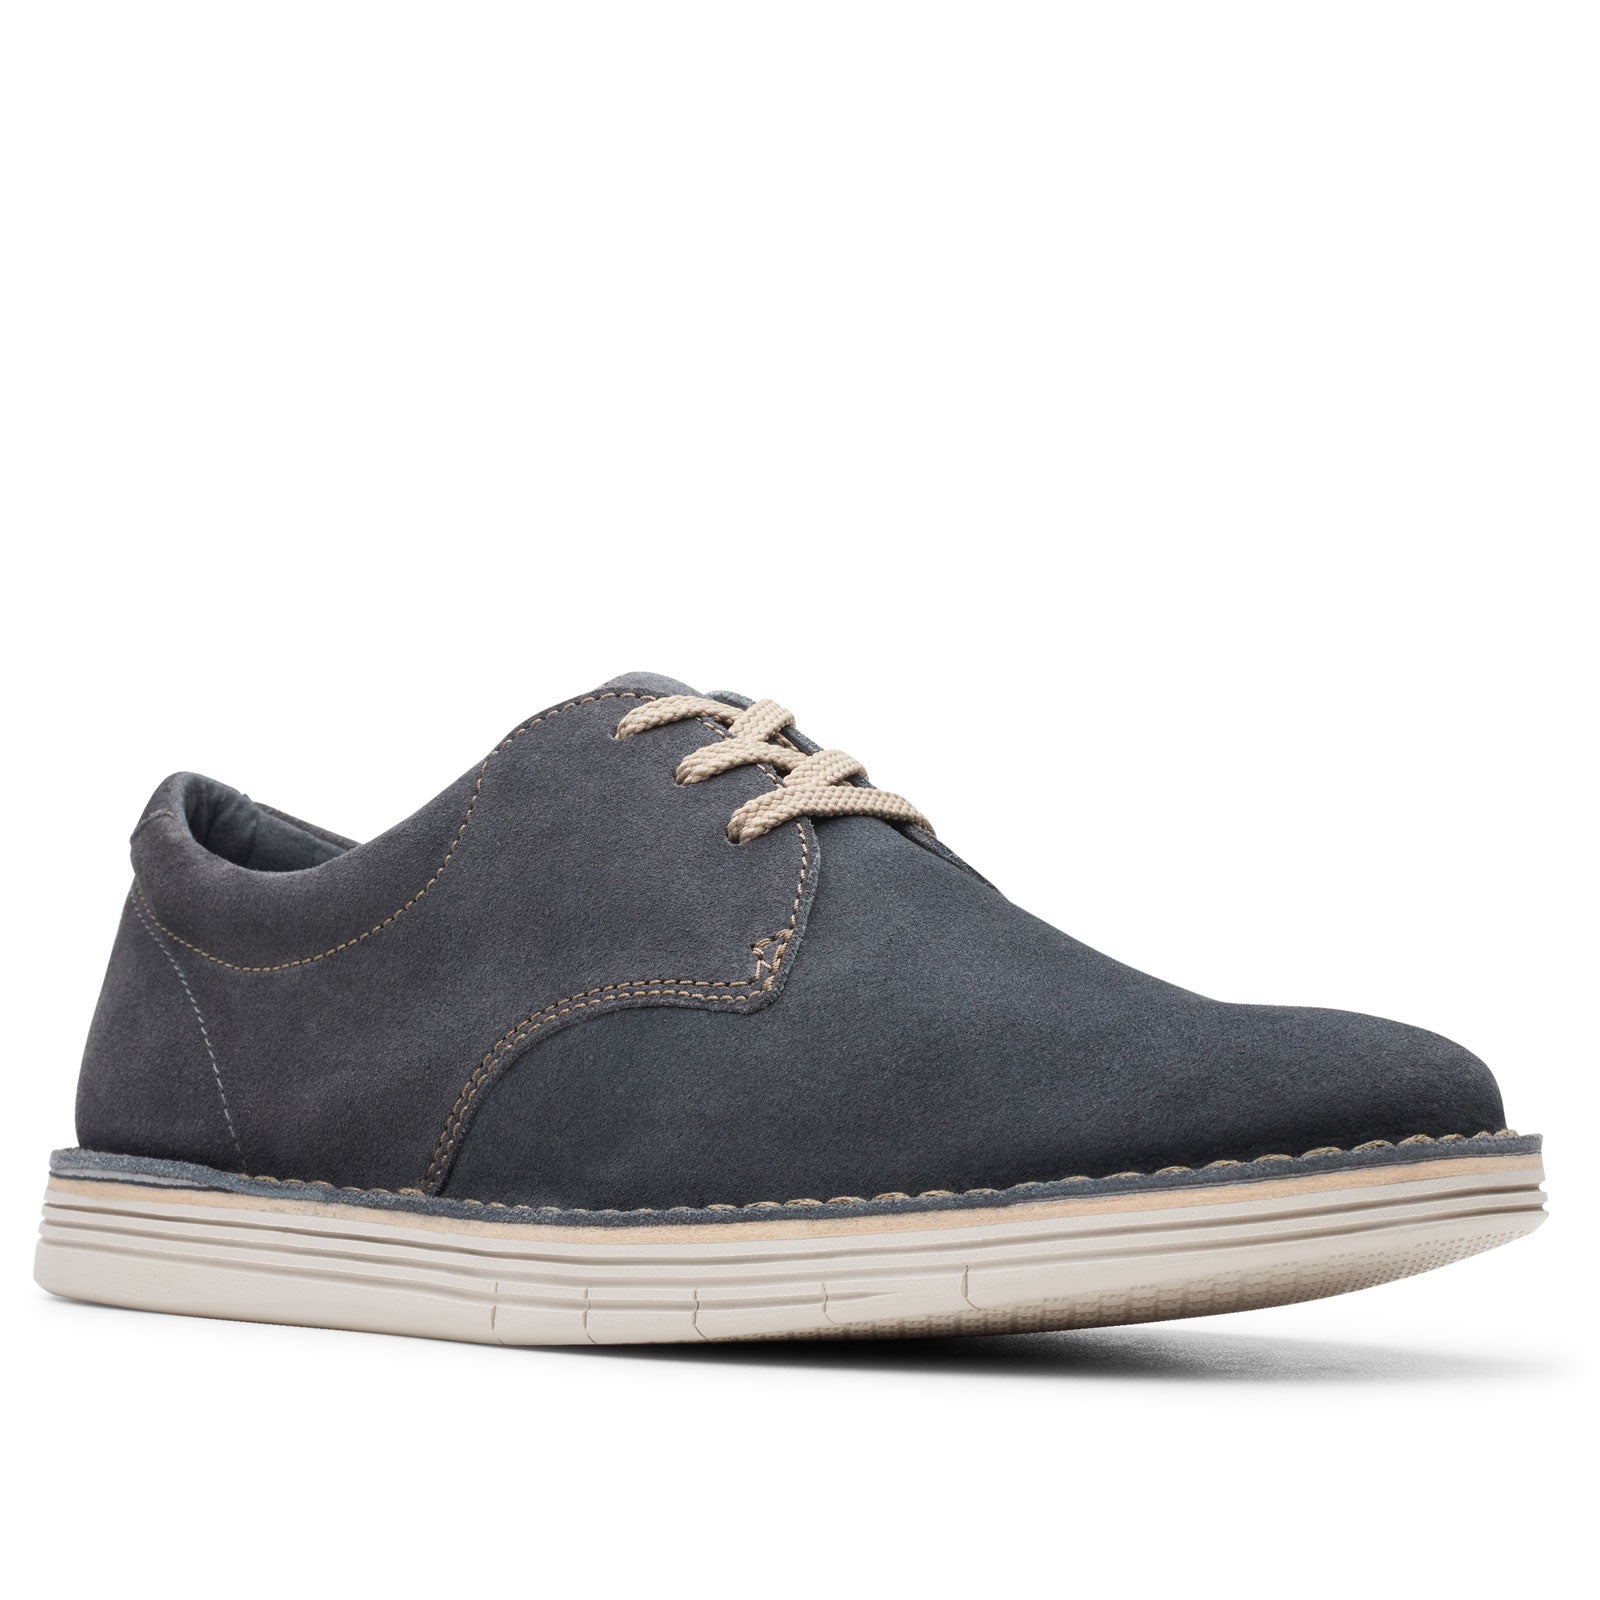 Clarks Forge Vibe 49641 (Storm Suede)